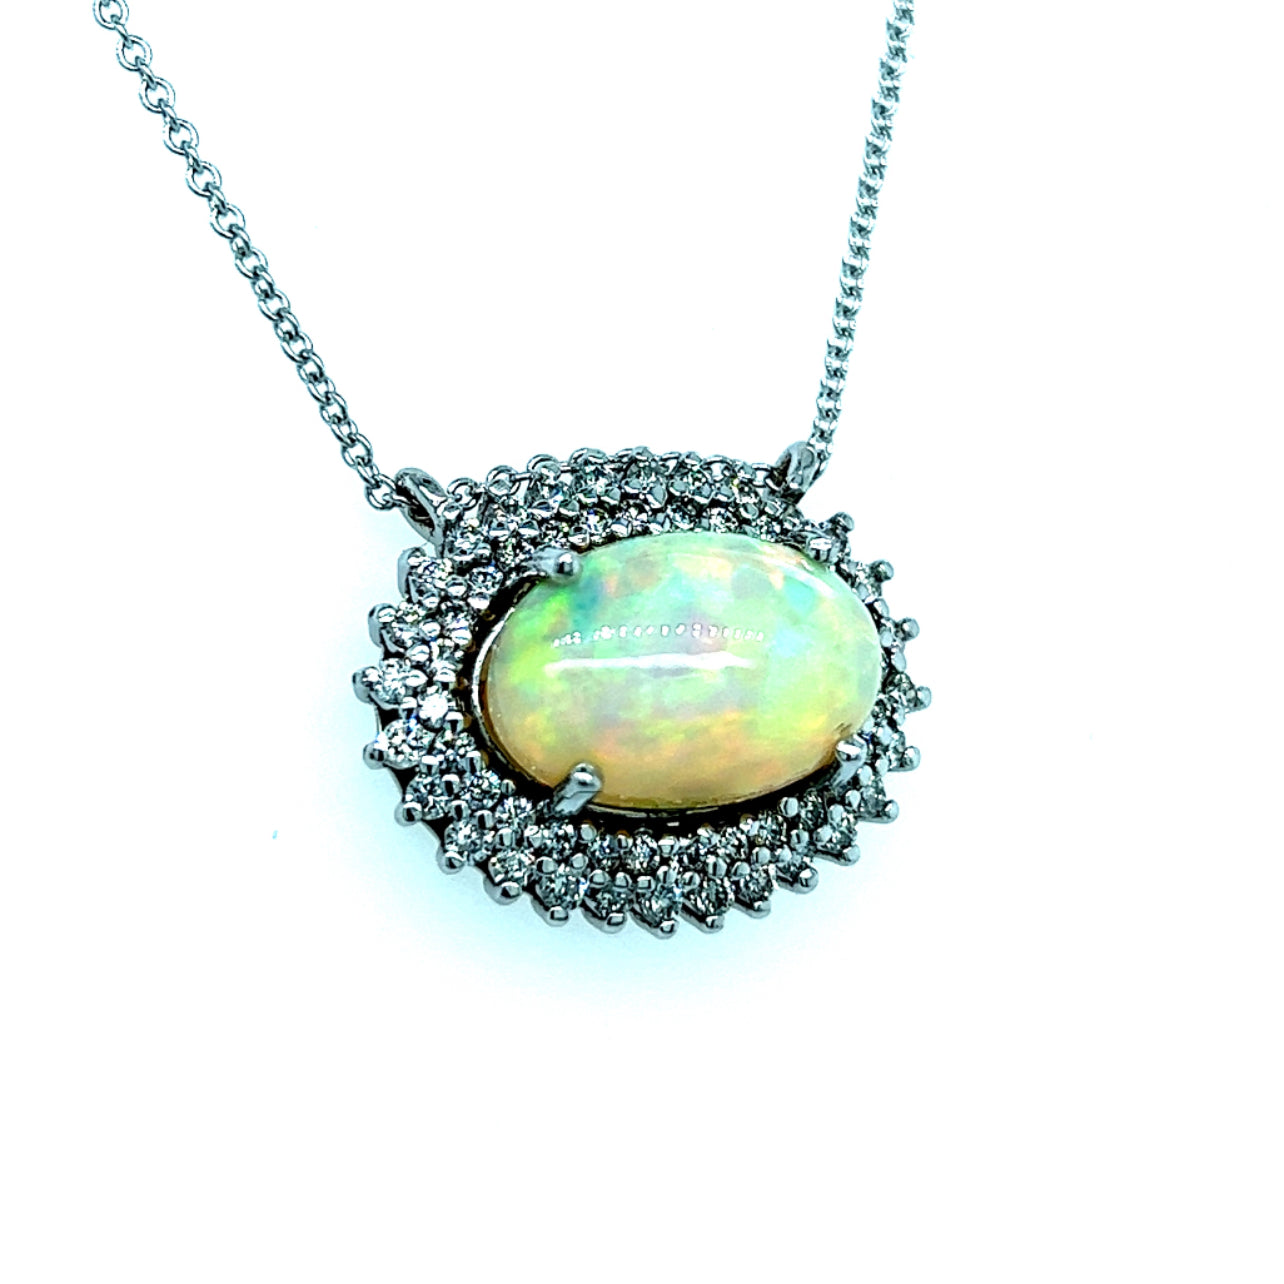 Natural Opal Diamond Pendant Necklace 18" 14k Gold 5.81 TCW Certified $5,950 301789